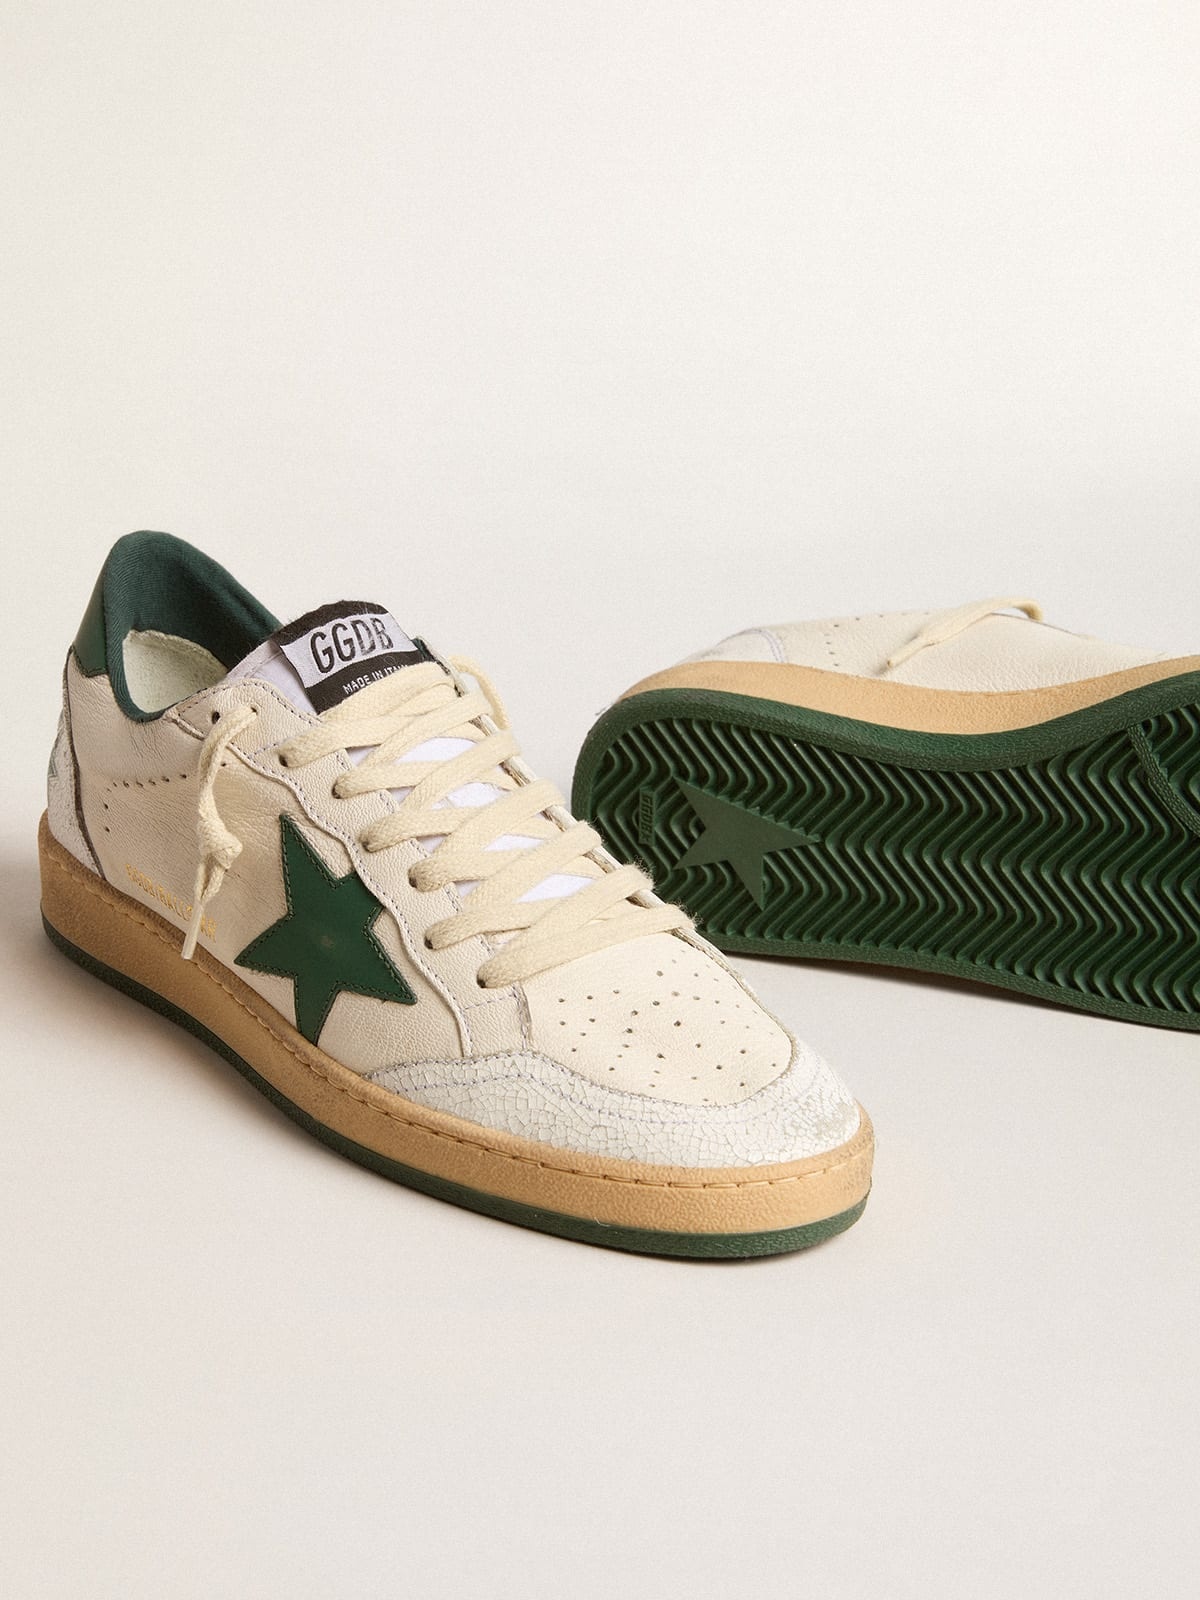 Women's Ball Star Wishes in white nappa leather with green leather star and heel tab - 4